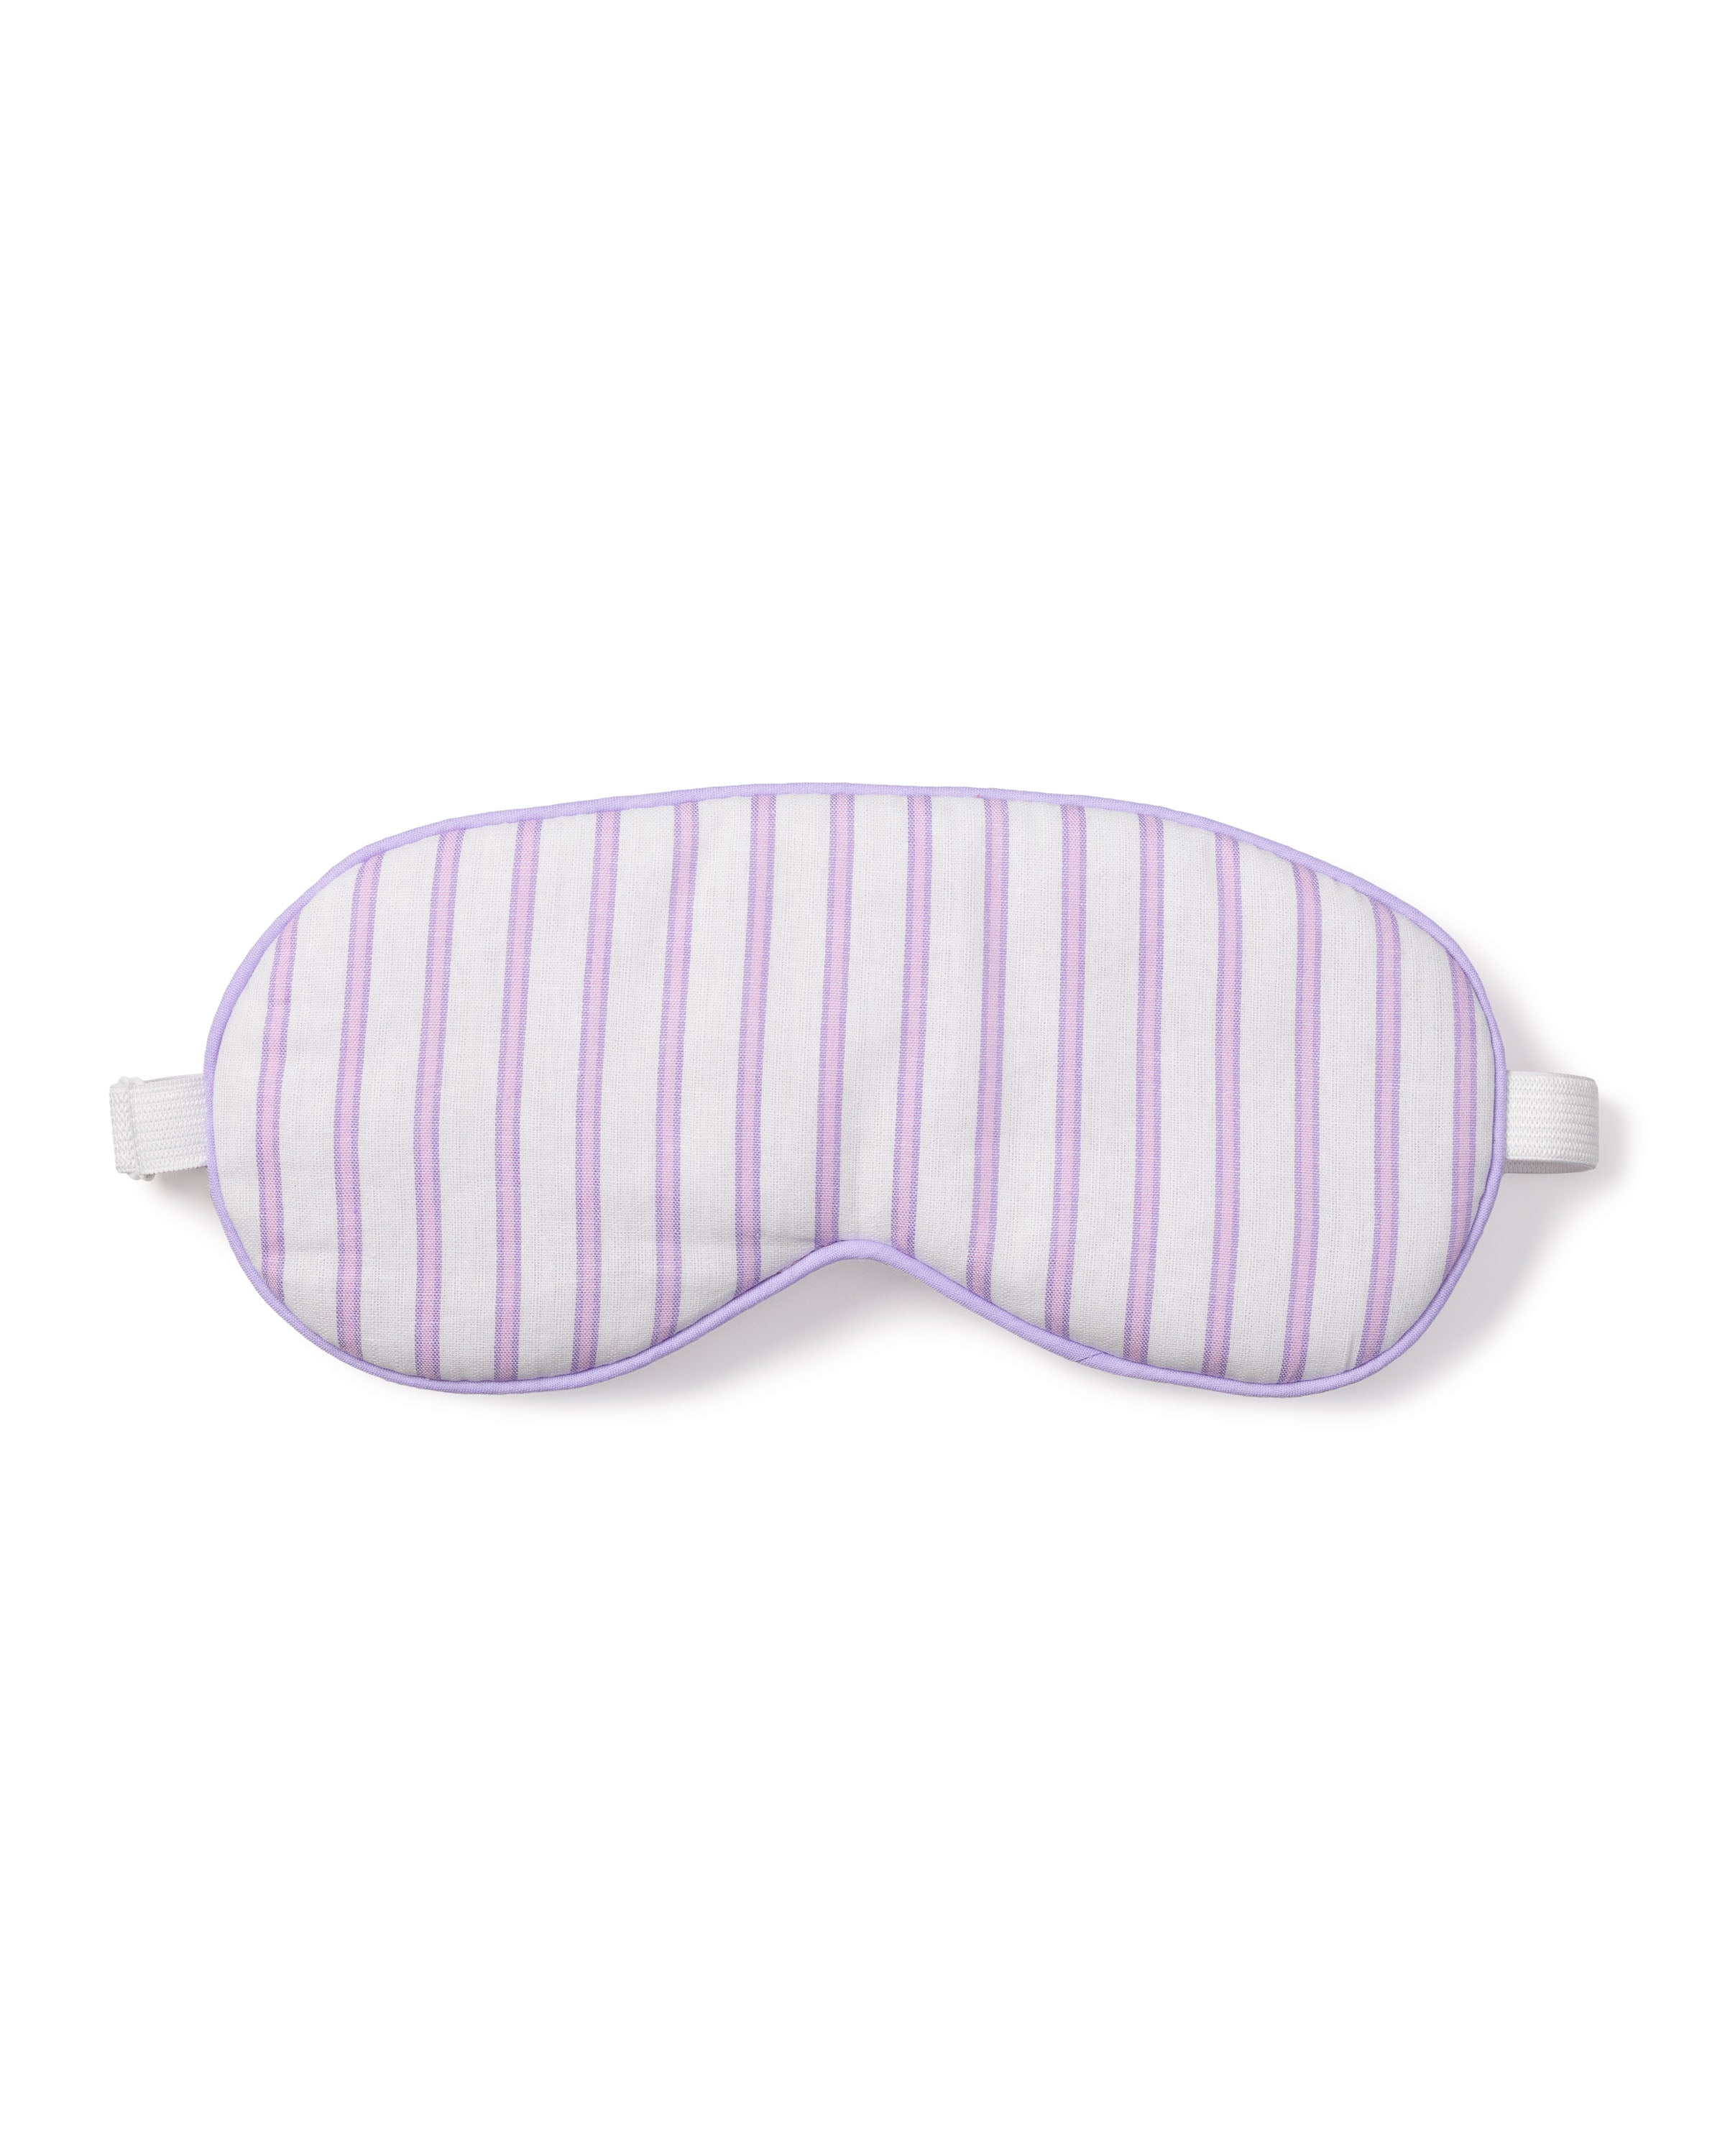 Adult's Sleep Mask in Lavender French Ticking